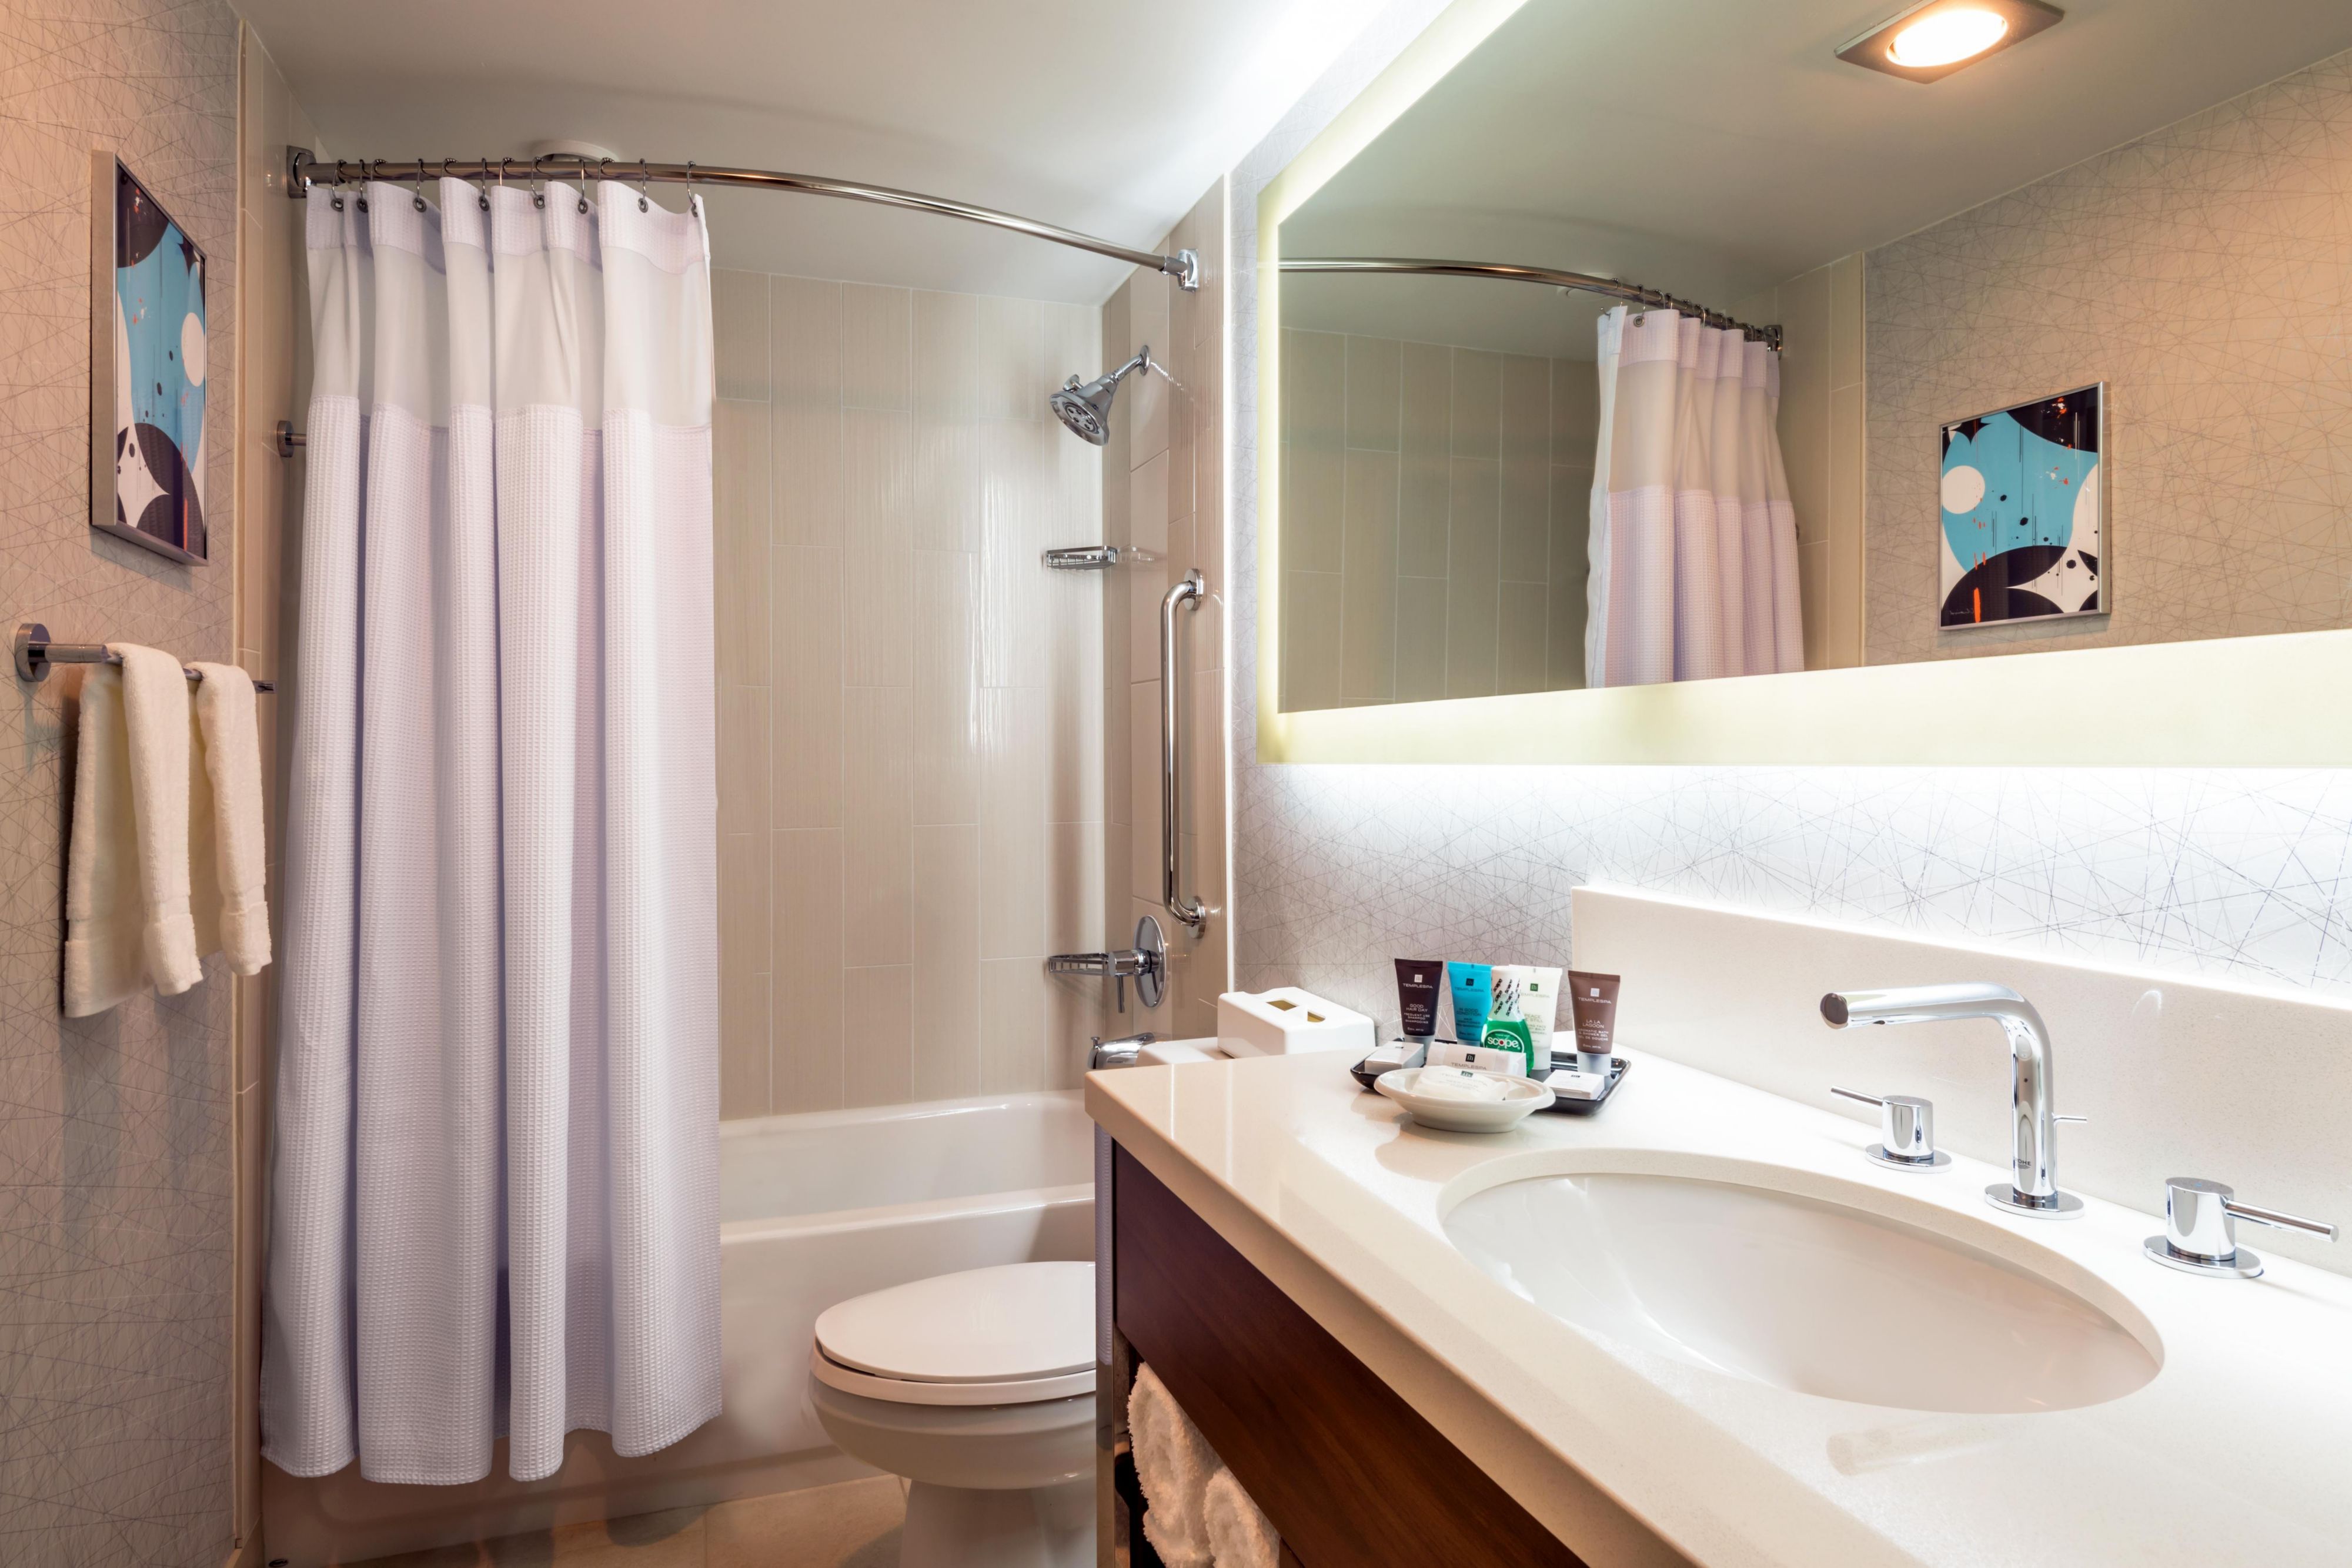 Newly renovated Guest Bathroom Temple Spa amenities